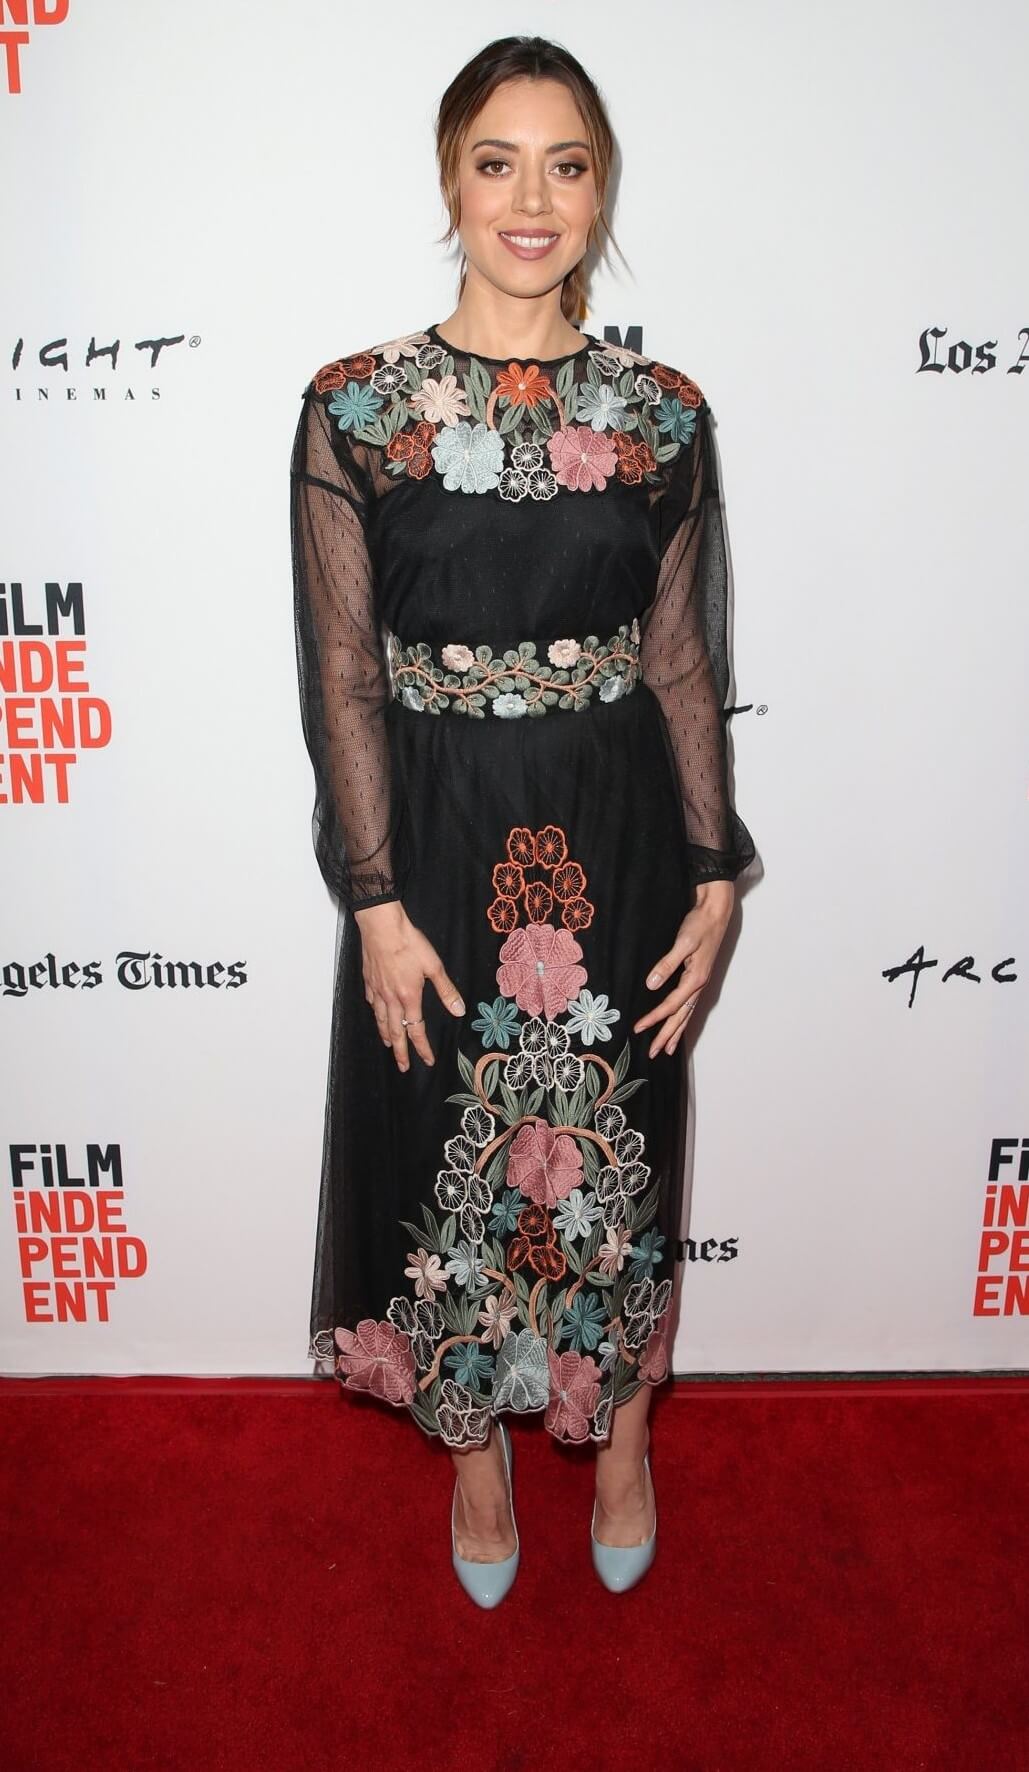 Aubrey Plaza  In Black Floral Embroidery Long Dress At “The Little Hours” Screening in Culver City